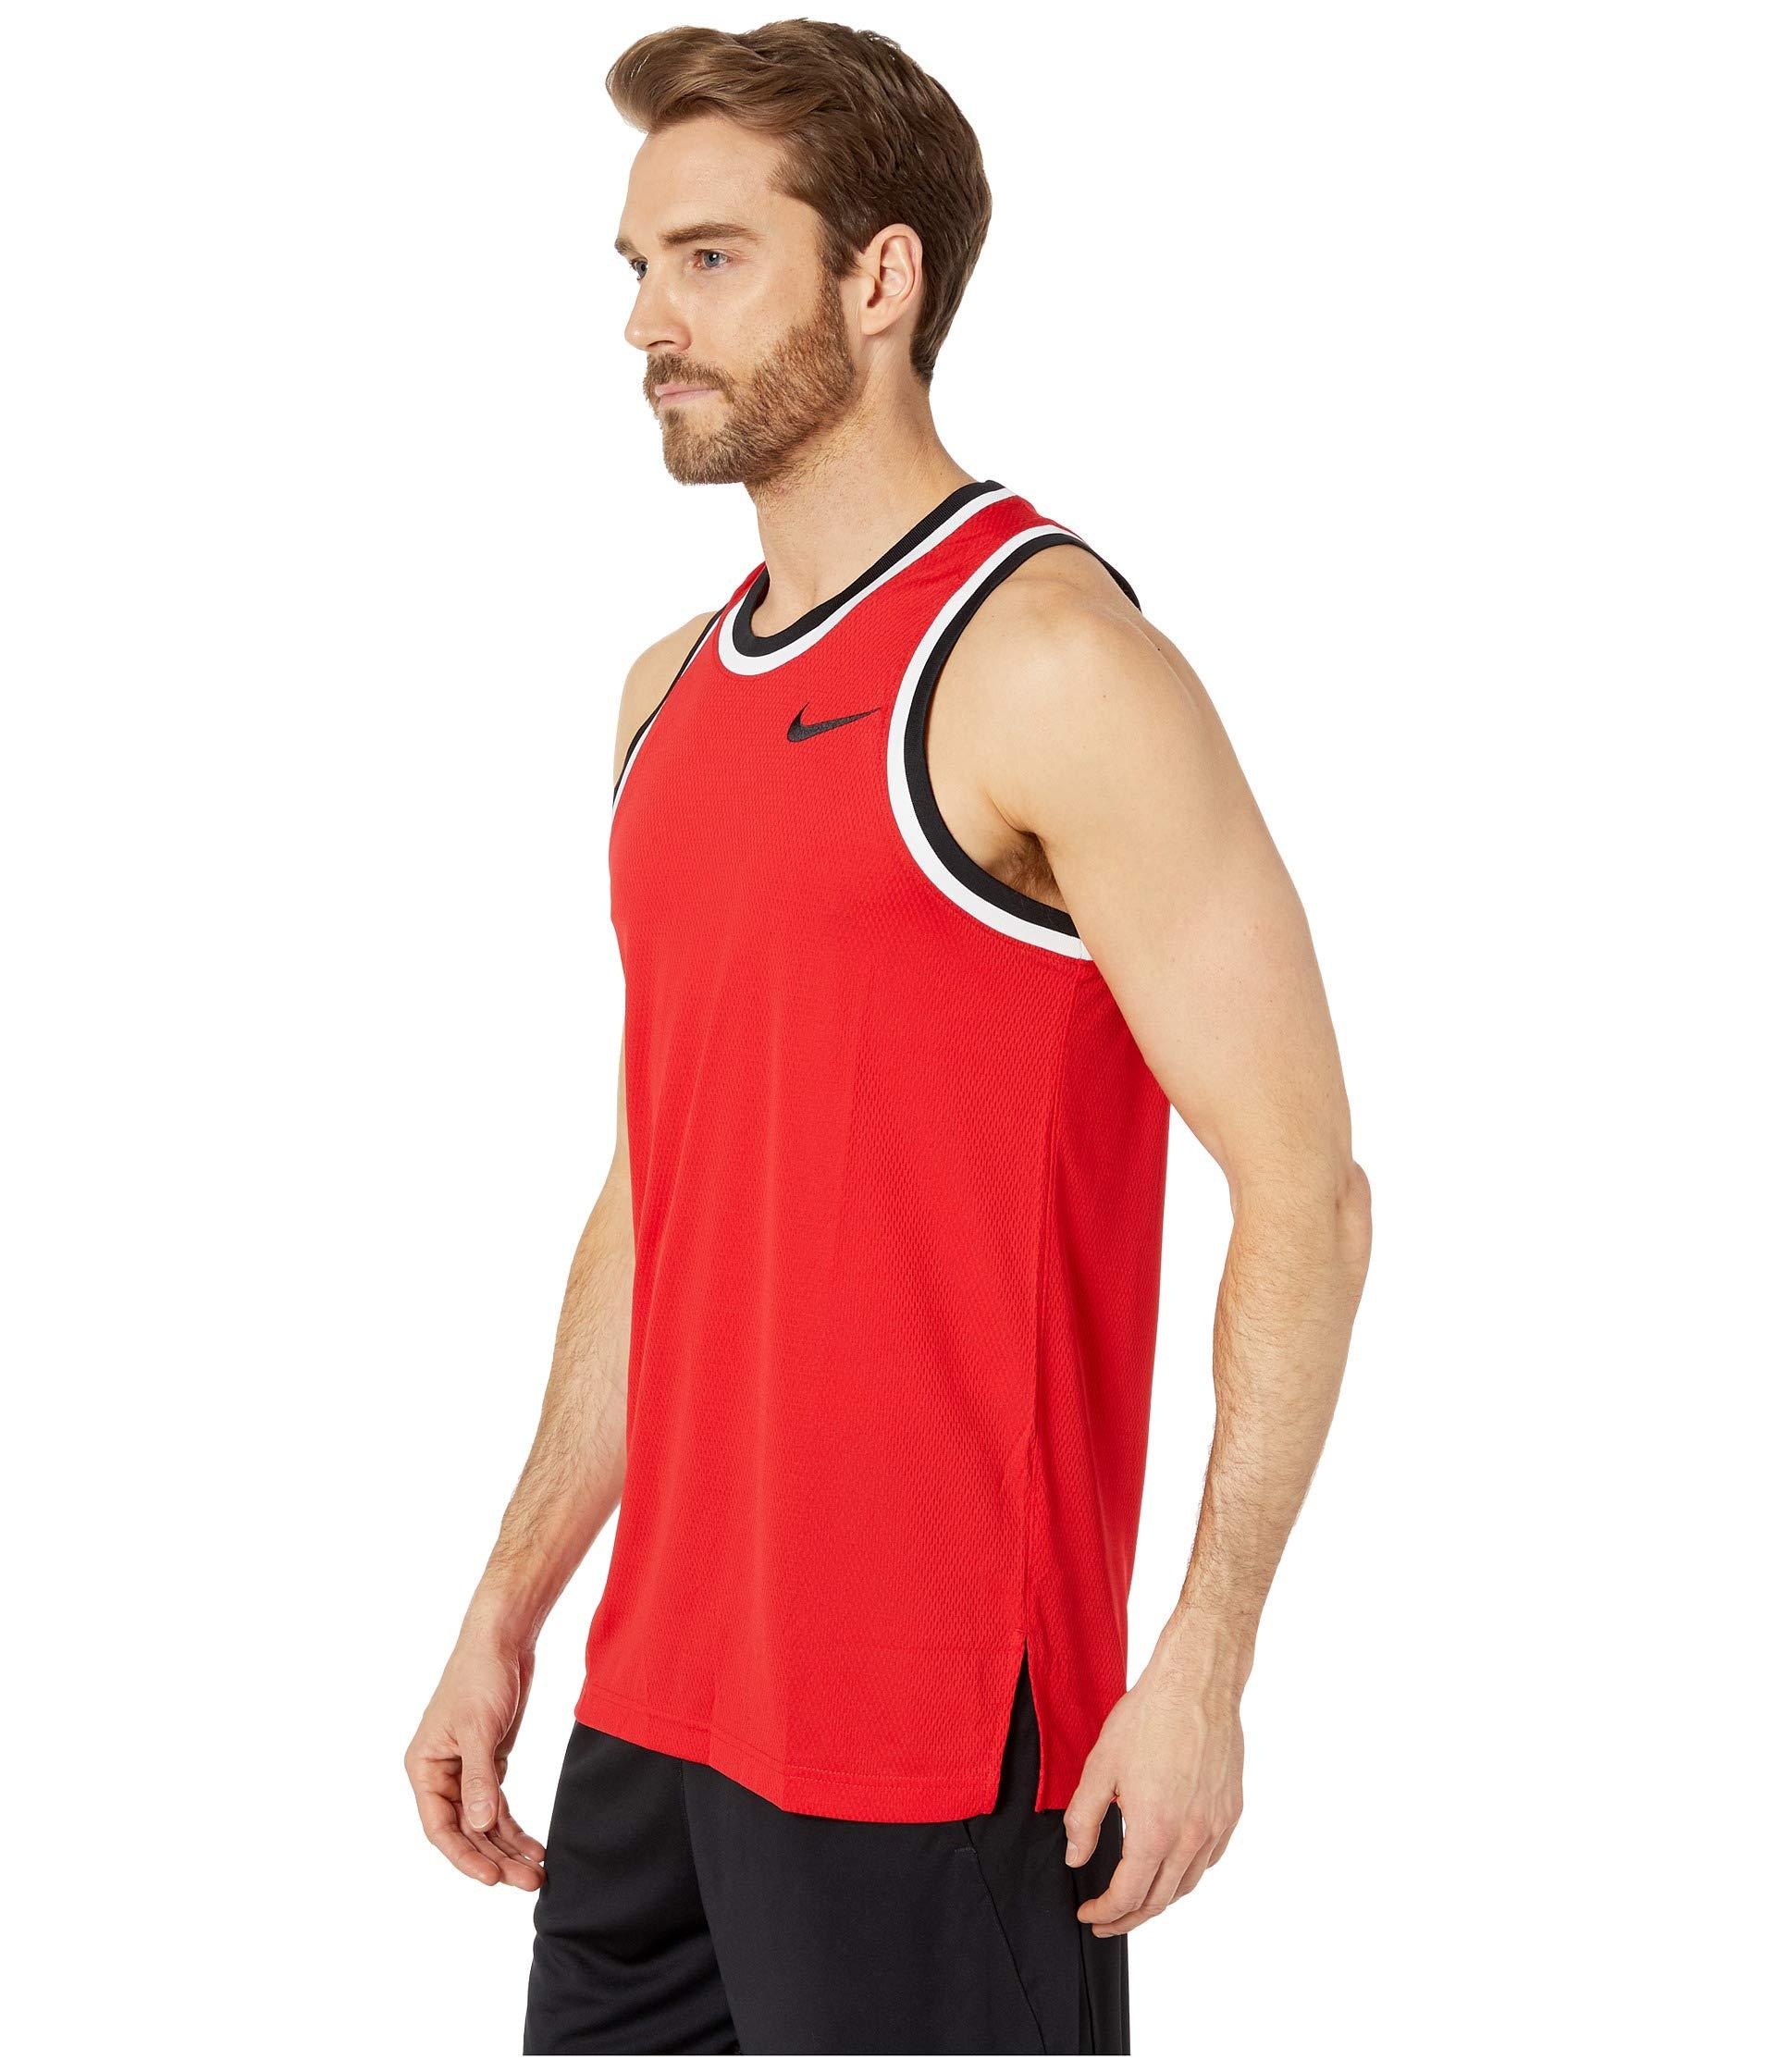 nike dry classic jersey - Online Discount Shop for Electronics, Apparel,  Toys, Books, Games, Computers, Shoes, Jewelry, Watches, Baby Products,  Sports & Outdoors, Office Products, Bed & Bath, Furniture, Tools, Hardware,  Automotive